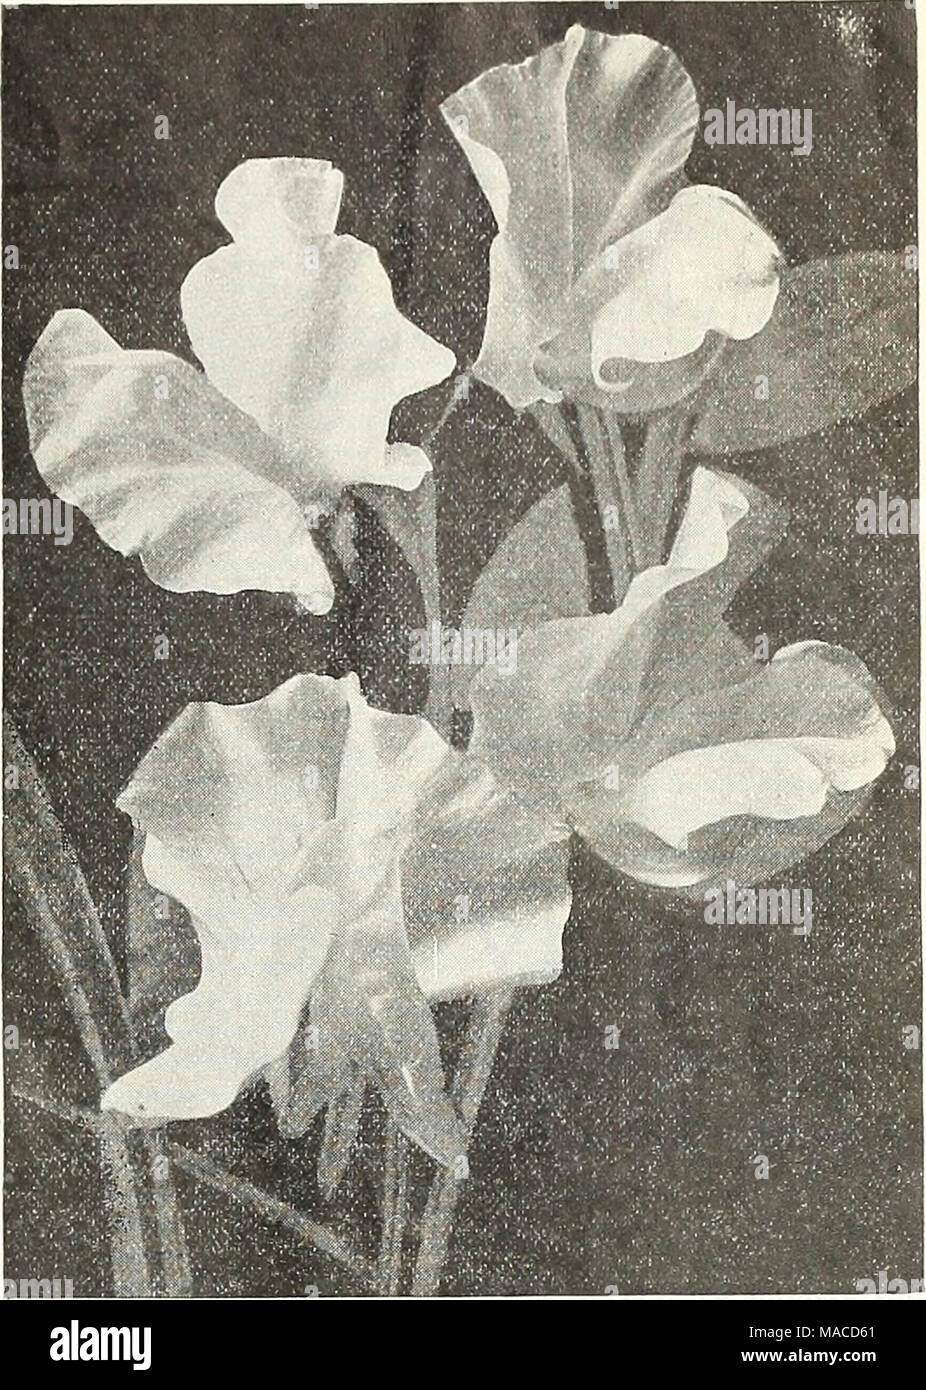 . Dreer's wholesale price list : seeds for florists plants for florists bulbs for florists vegetable seeds, fungicides, fertilizers, implements, insecticides, sundries, etc . ORCHID FLOWERED SWEET PEAS (OFFERED ON PAGE 12') Viola (Tufted Pansies). Cornuta Paplllo (Butterfly Violet). Blue . . Lutea splendens. Clear yellow .... Blue Perfection. Deep blue White Perfection. Fine white .... Hybrida Admirabilis. 14 cts. per pkt. nixed. All colors ... Odorata. Mixed. (Sweet Violet.) Tr. pkt. Oz. Viscaria. Cardinalis. Bright red Oculata Mixed. All colors Wallflower. Single Qoliath. Deep velvety brown  Stock Photo